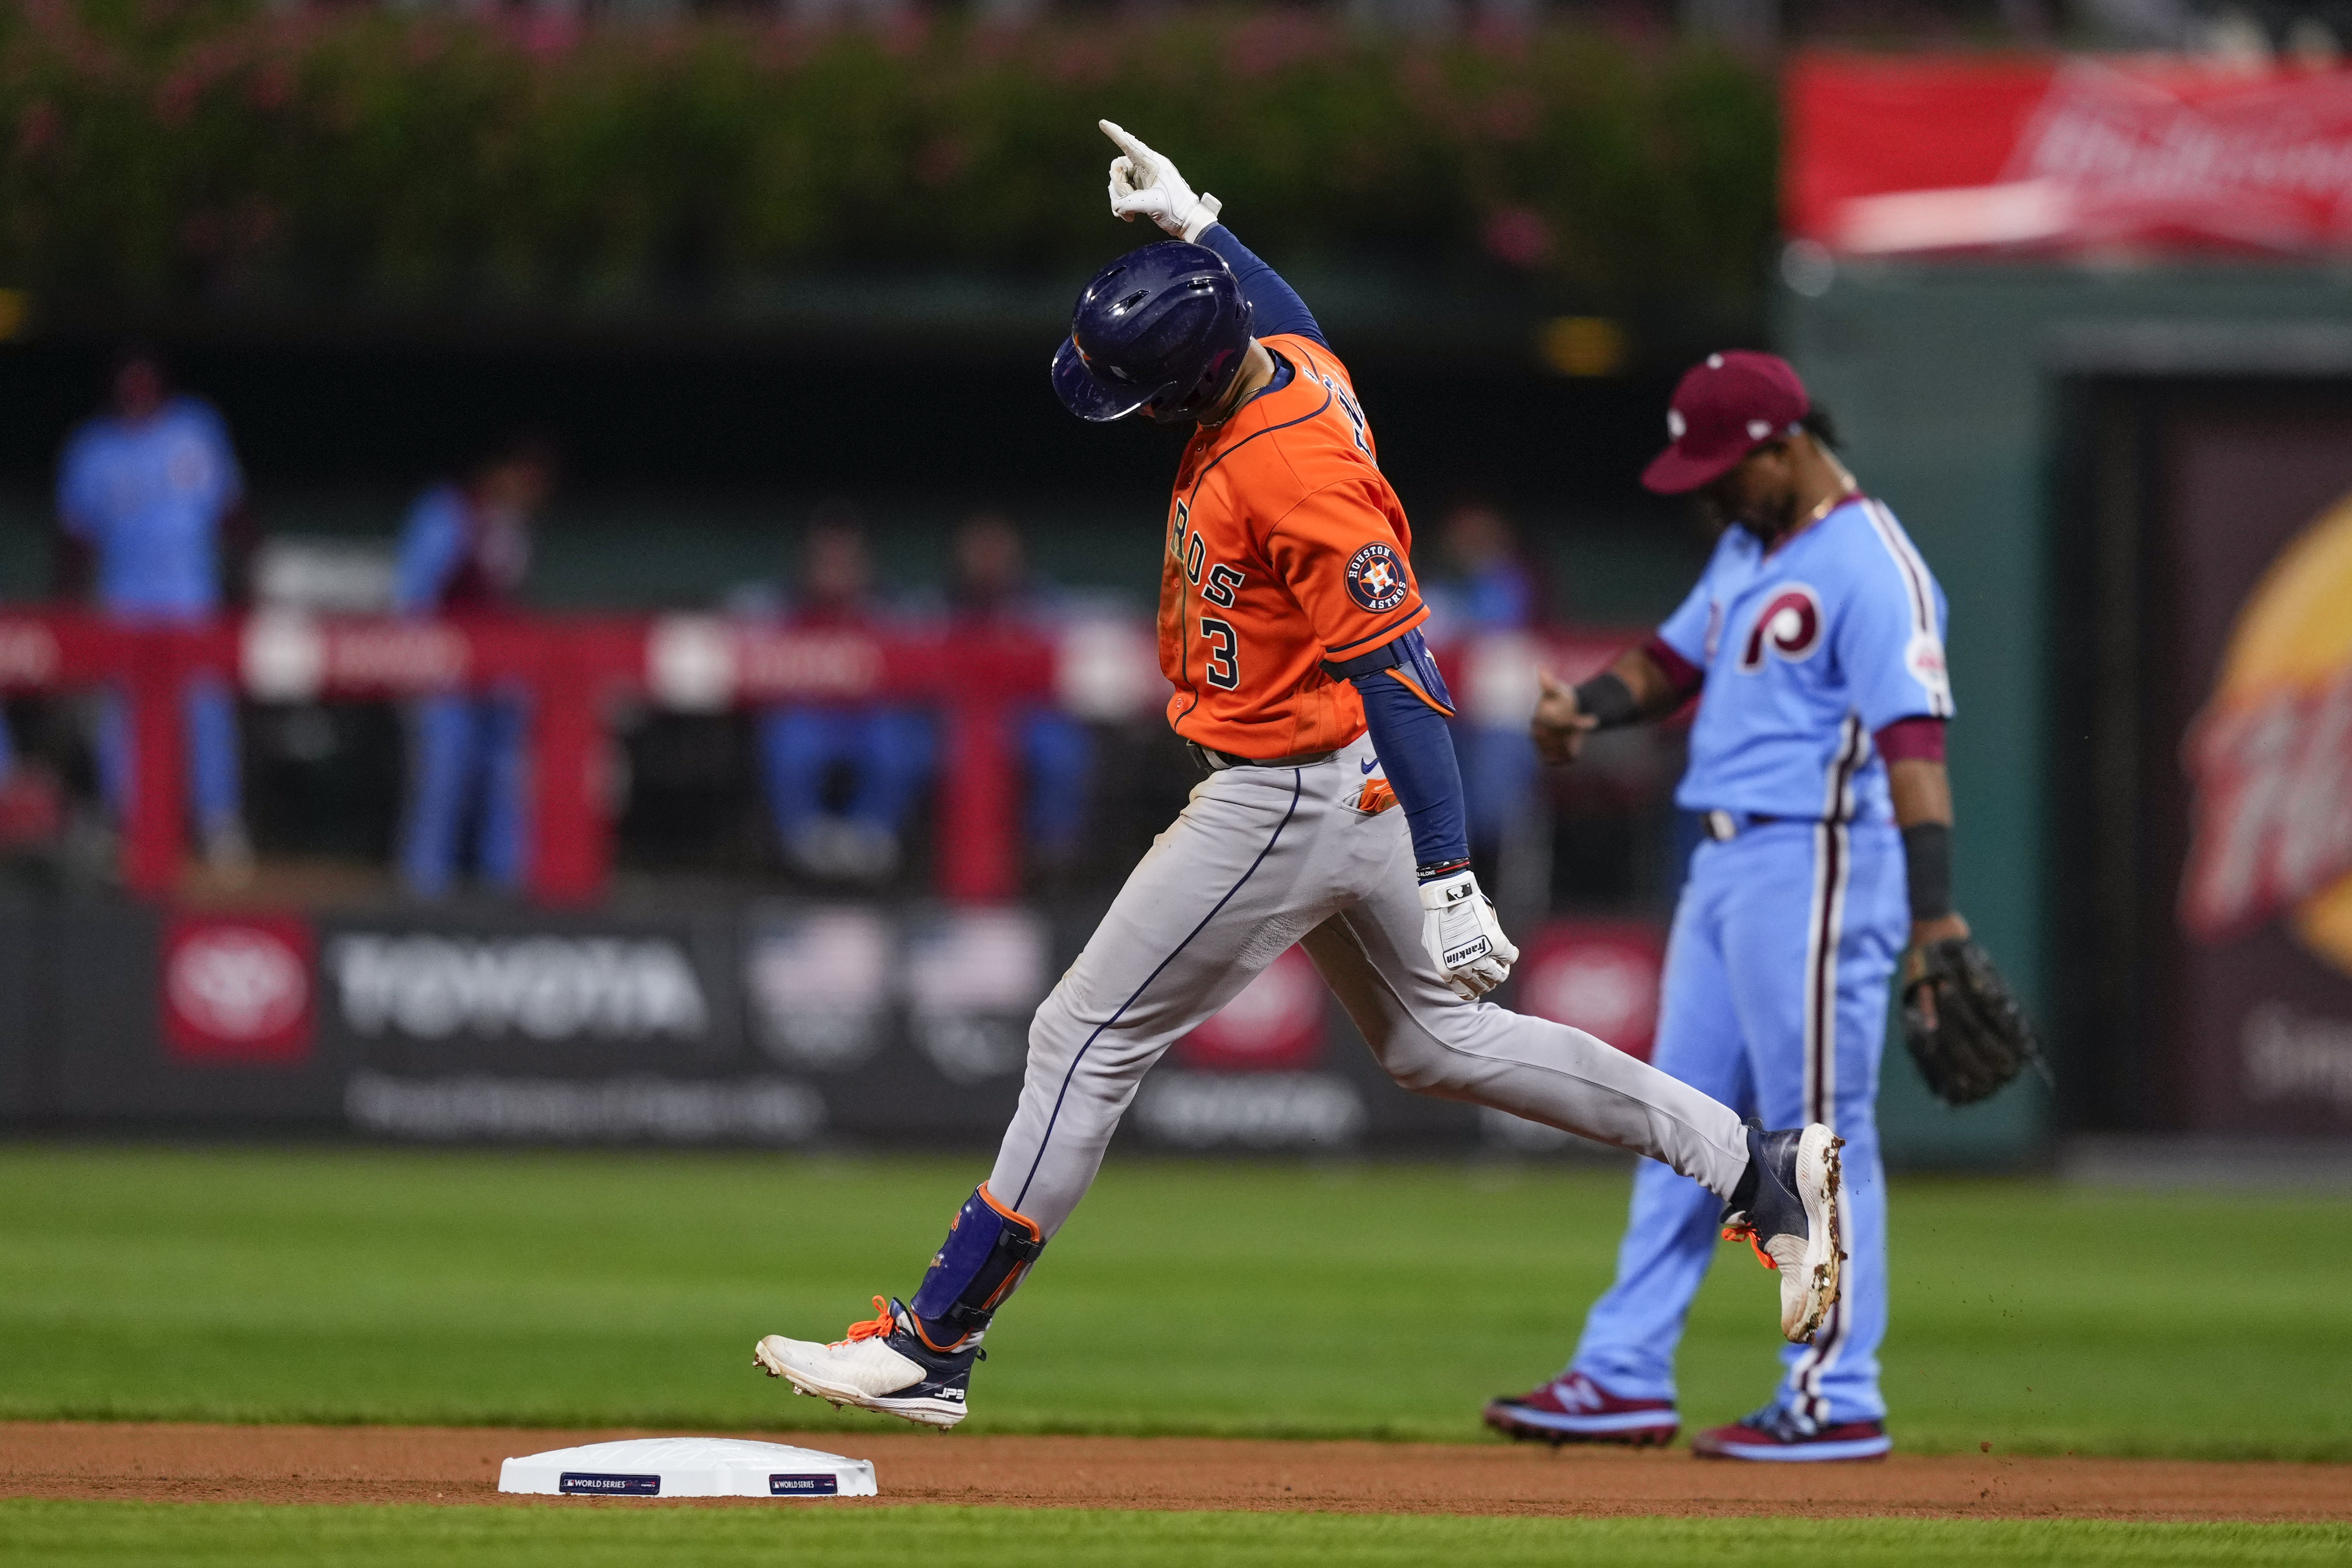 Astros rookie star Peña delivers again in World Series win - The